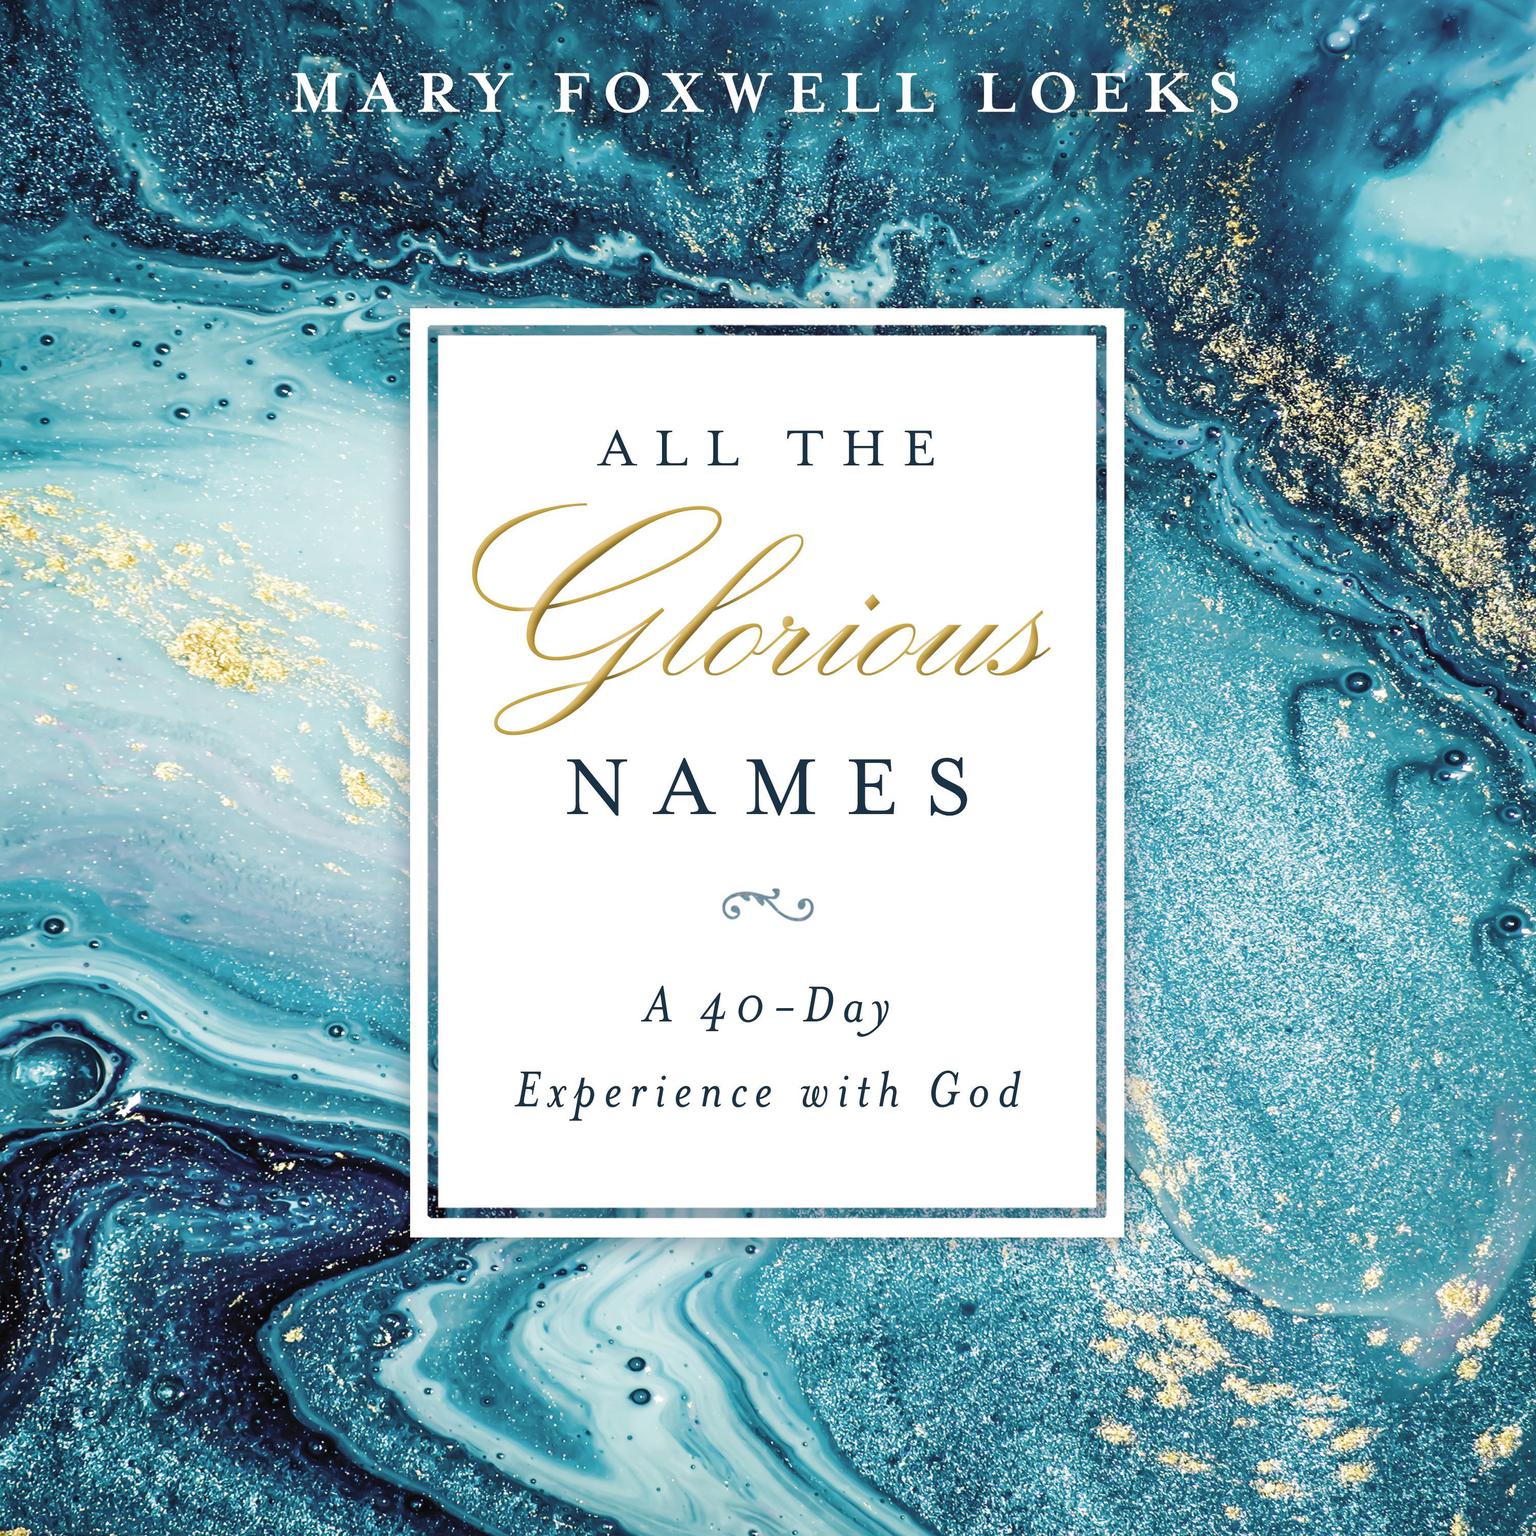 All the Glorious Names: A 40-Day Experience with God Audiobook, by Mary Foxwell Loeks